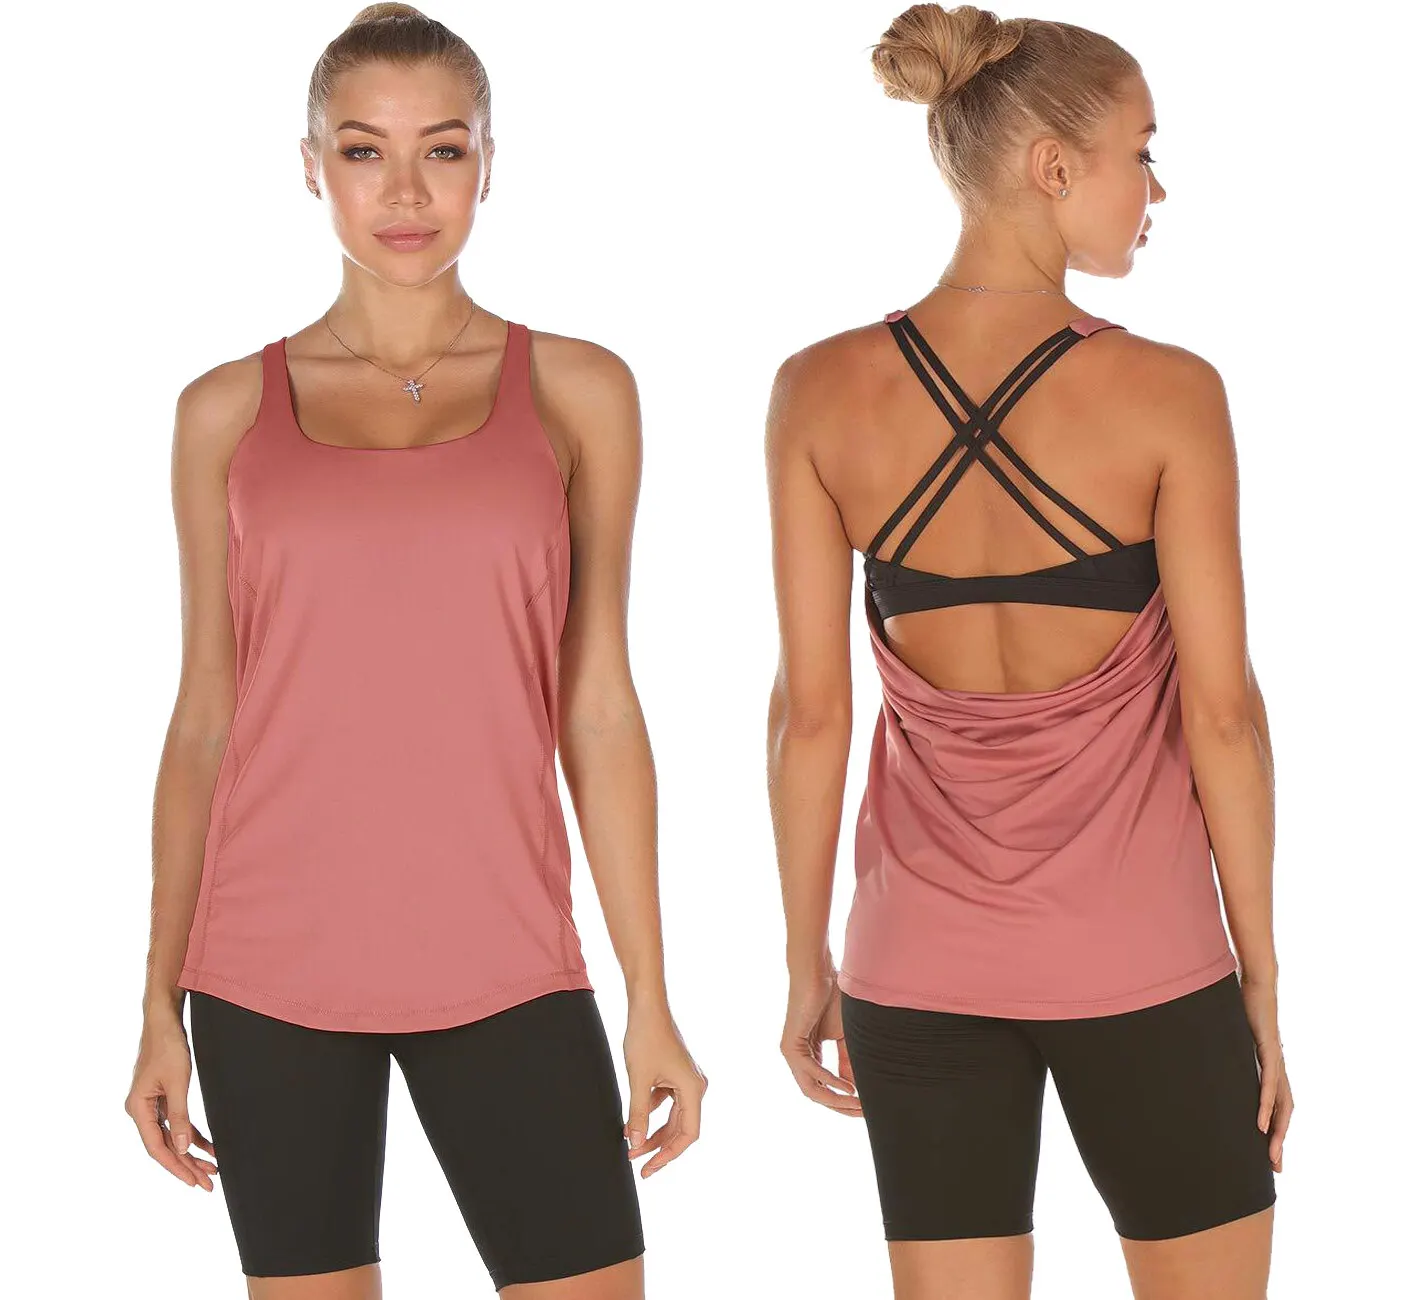 

Women Yoga Tops Vest Tank Tops Strappy Athletic , Exercise Running Gym sports workout